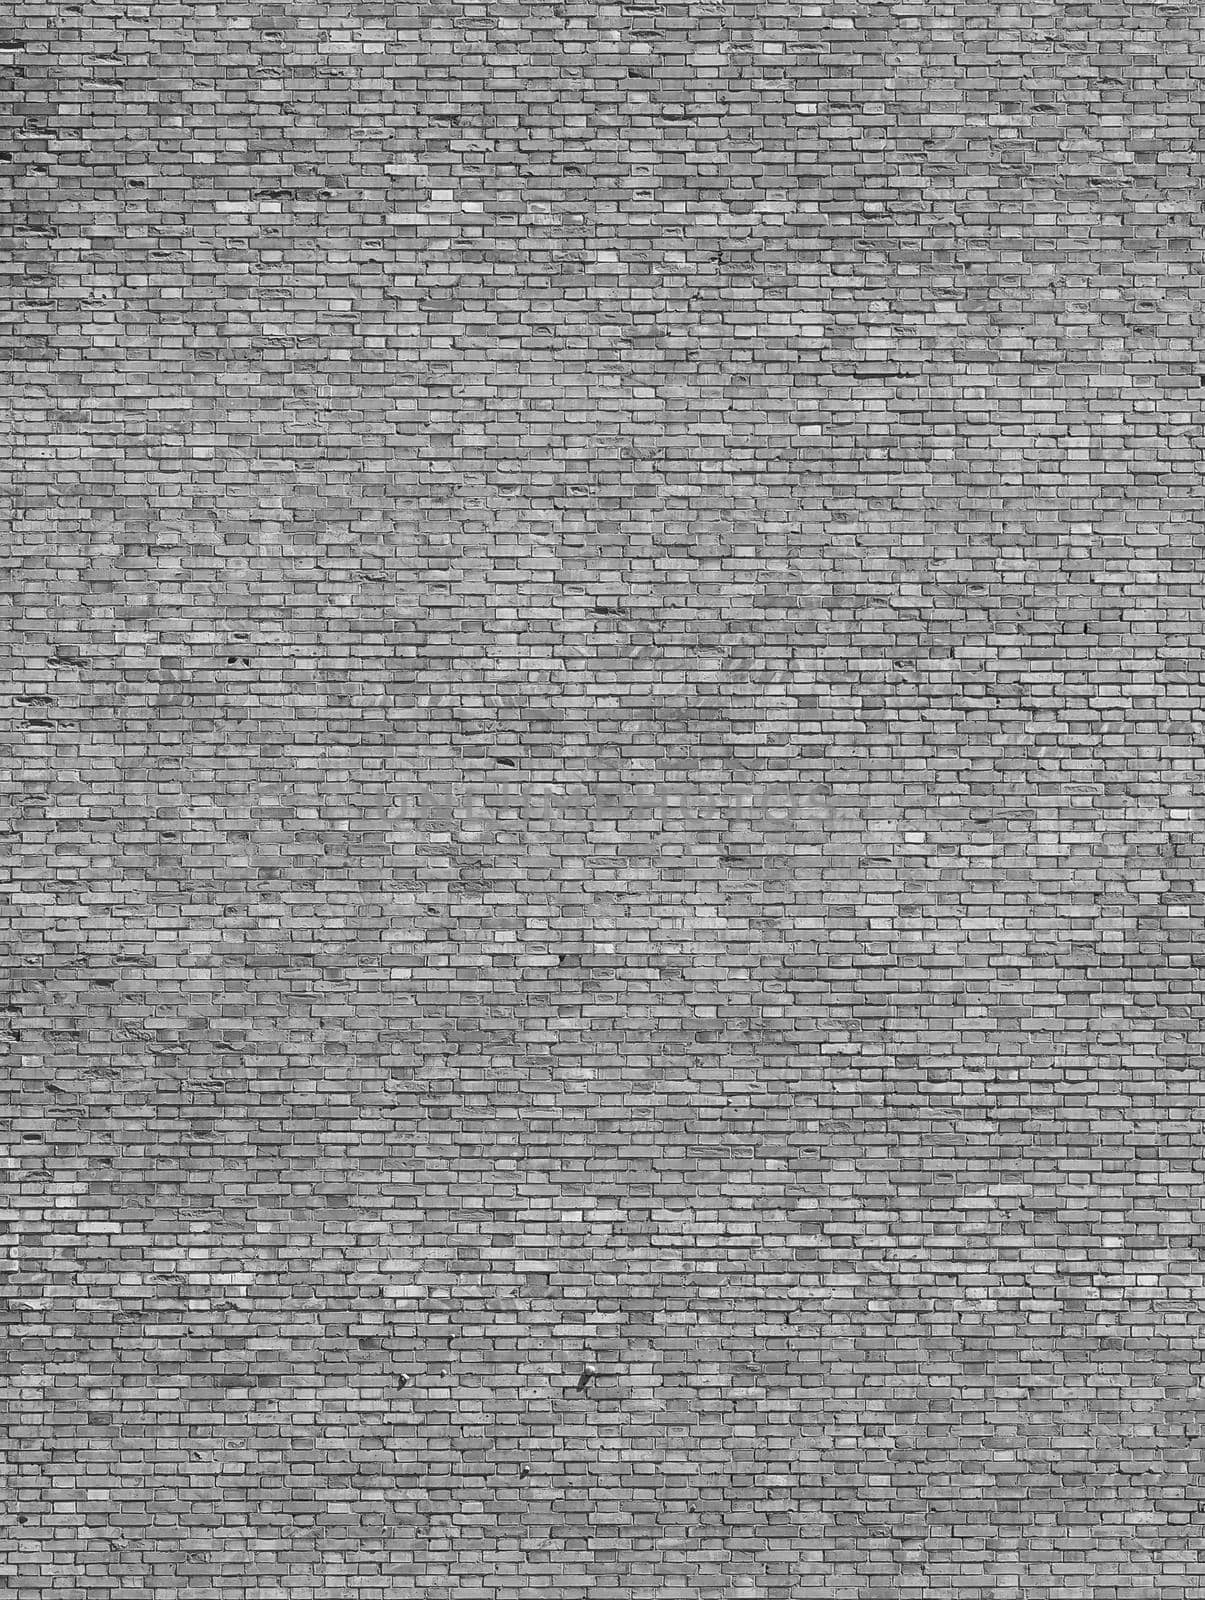 brick wall background in black and white by claudiodivizia